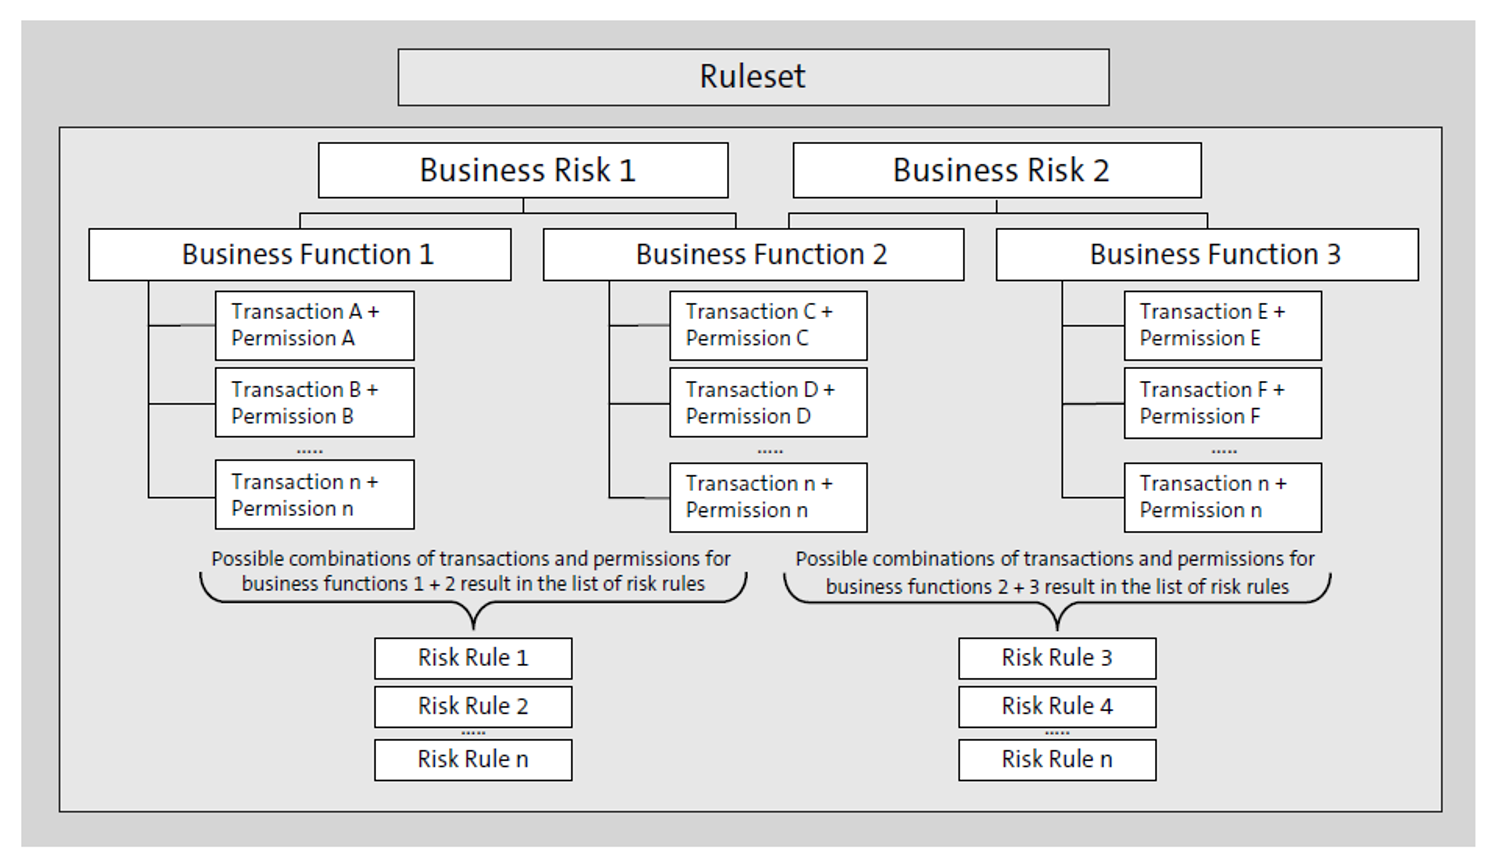 Architecture of a Ruleset